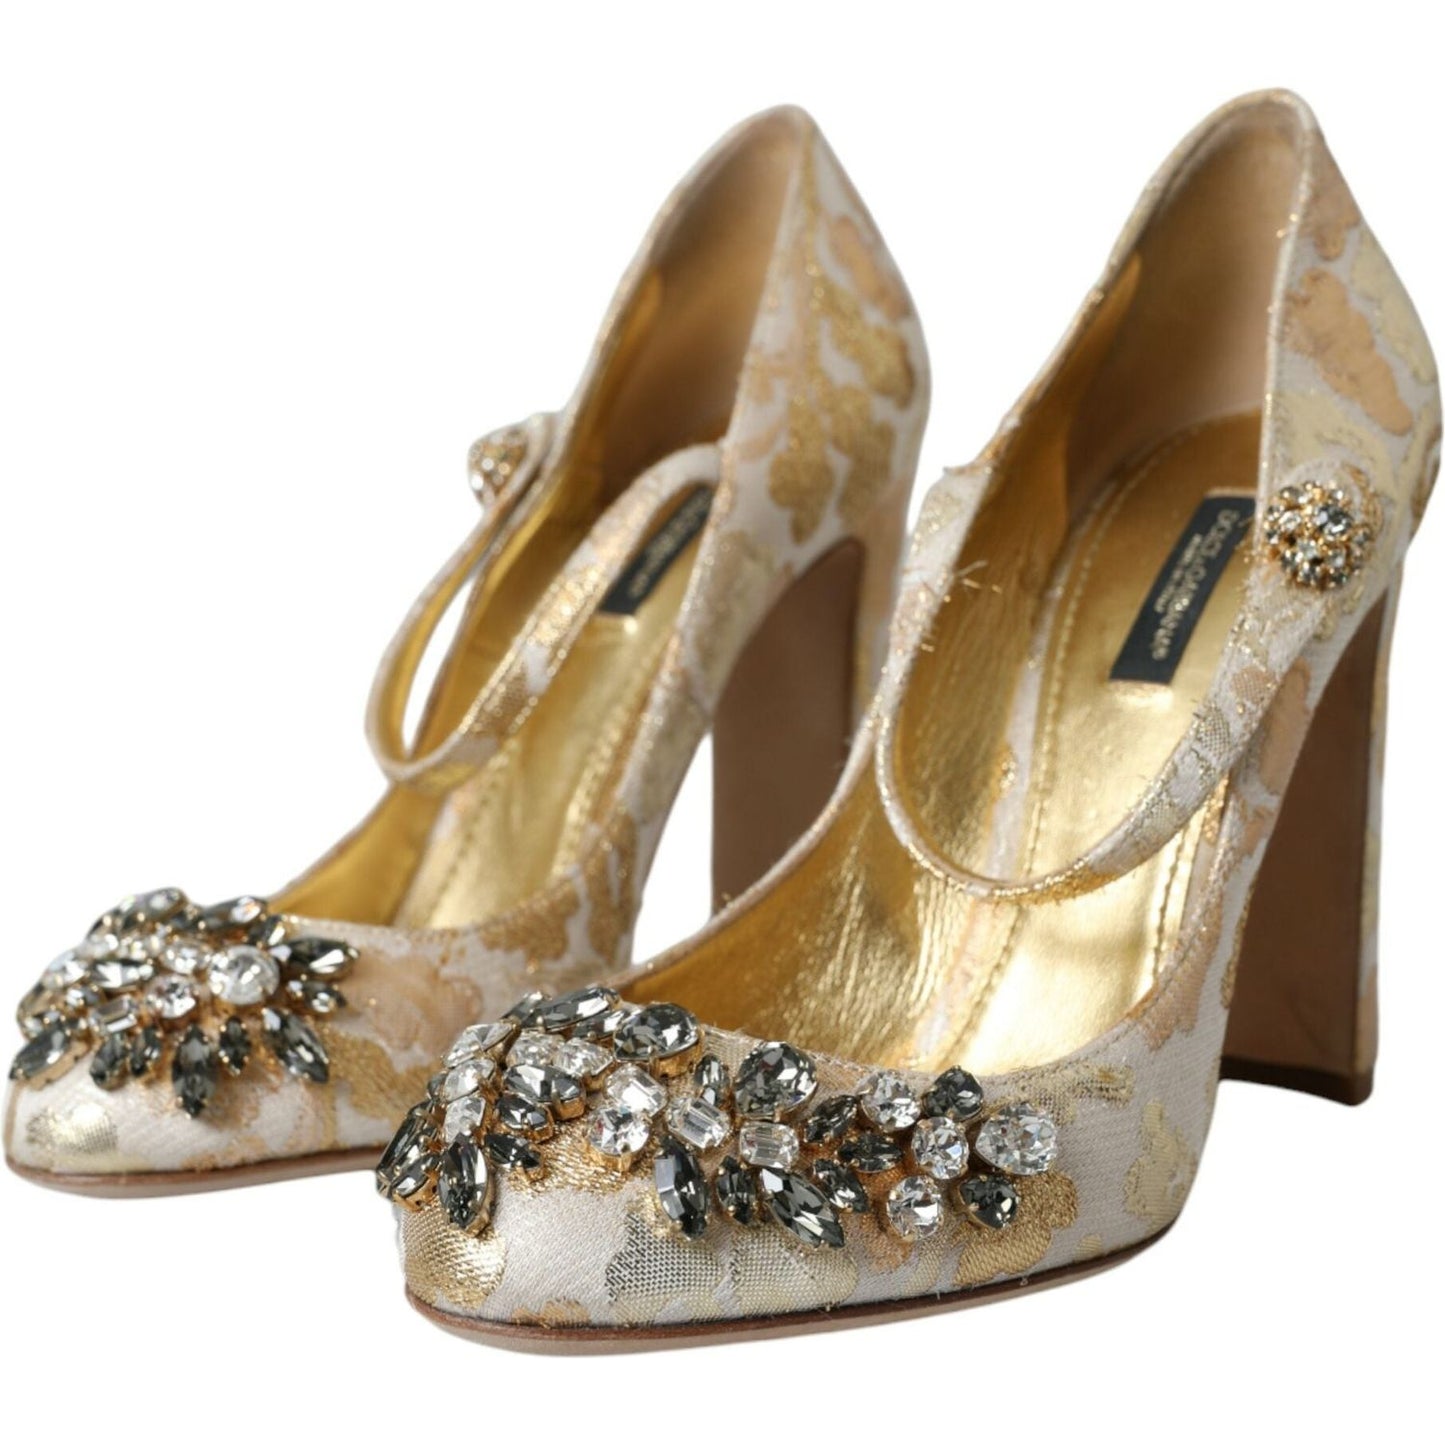 Dolce & Gabbana Gold Jacquard Crystal Mary Janes Pumps Shoes gold-jacquard-crystal-mary-janes-pumps-shoes